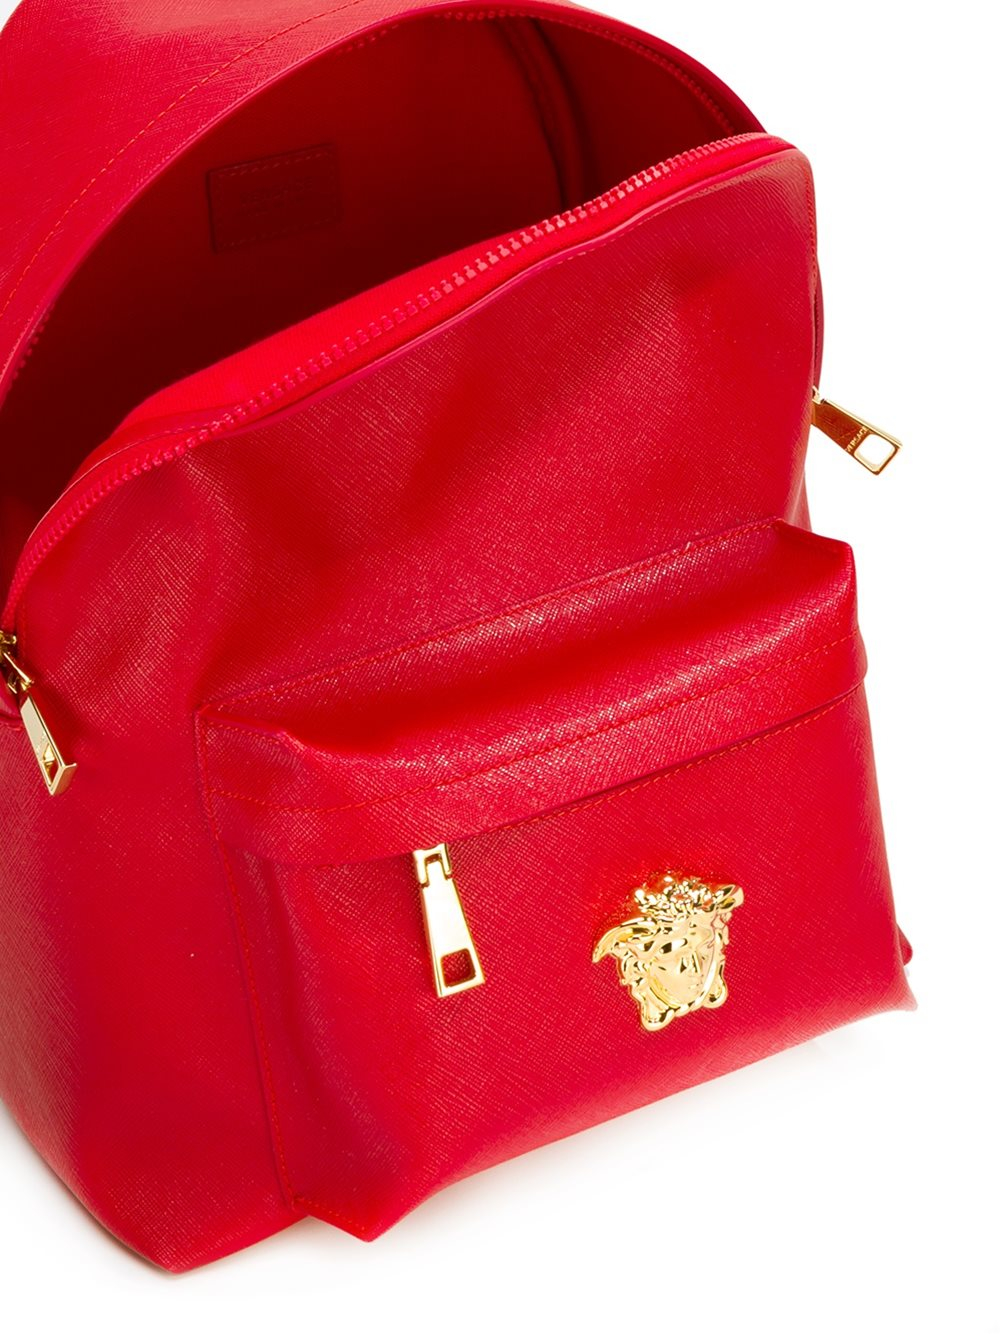 Versace Leather Medusa Backpack in Red - Lyst